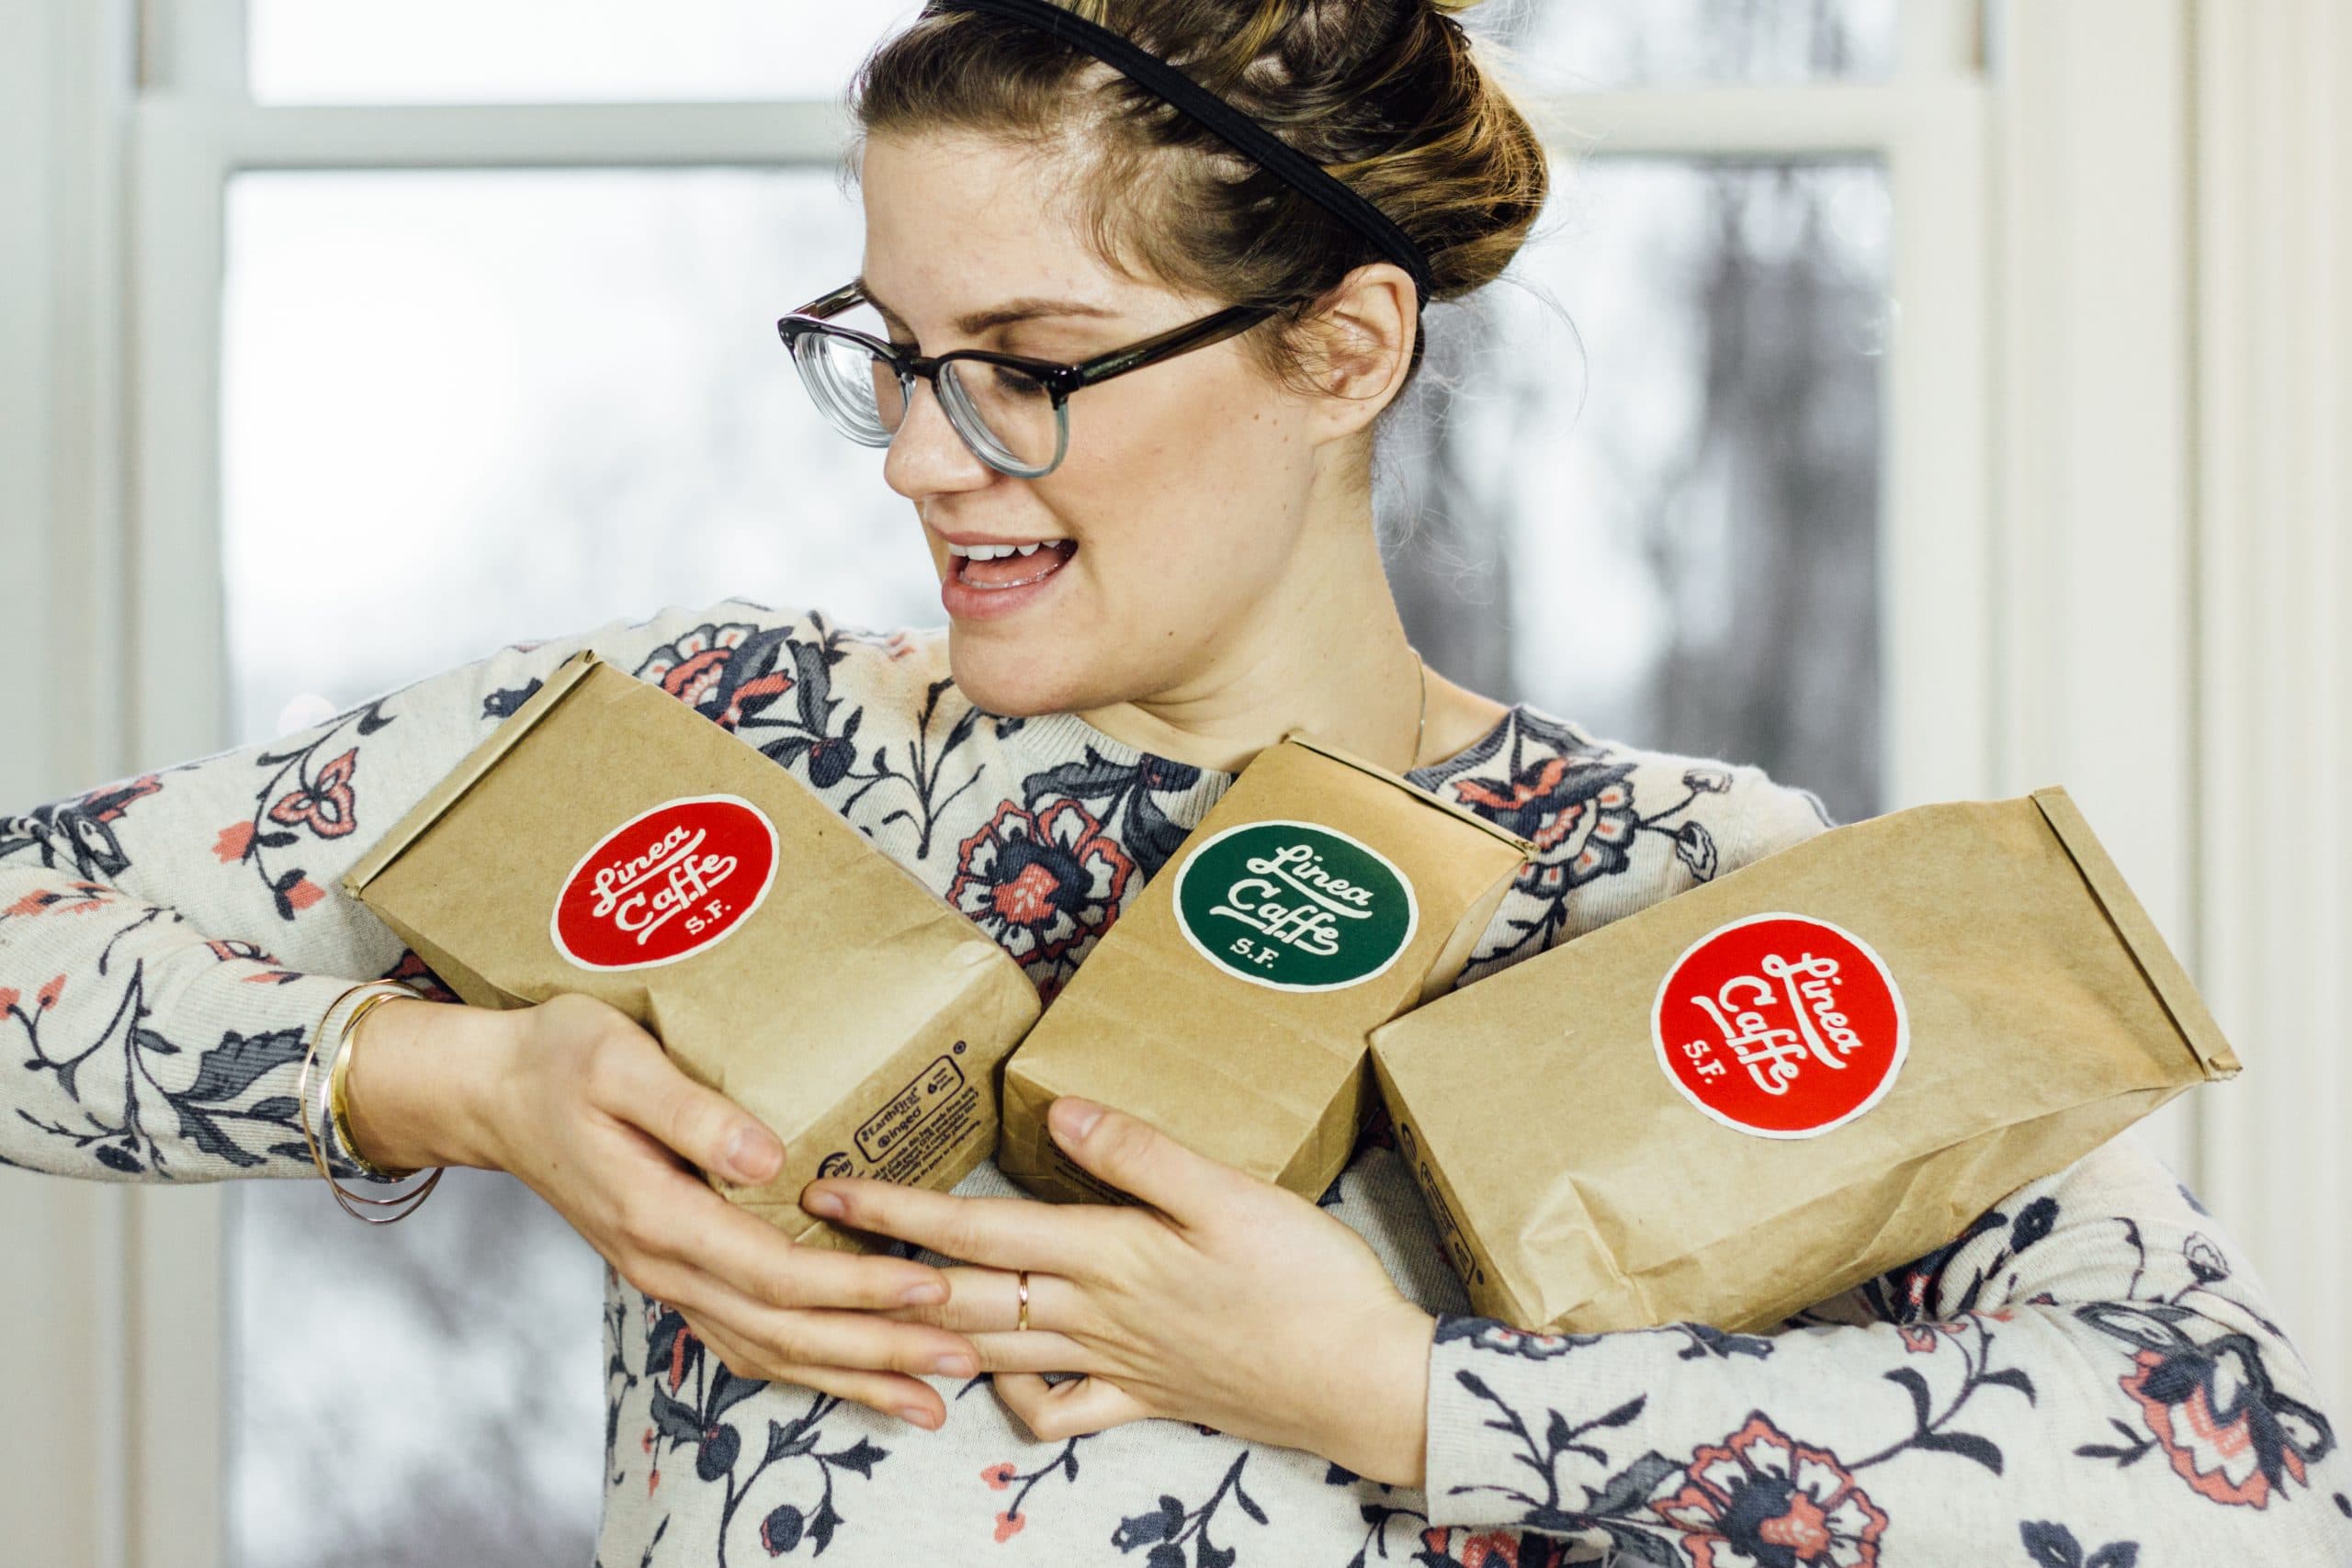 Melissa holding a trio of Linea Caffee coffee bags with much love.